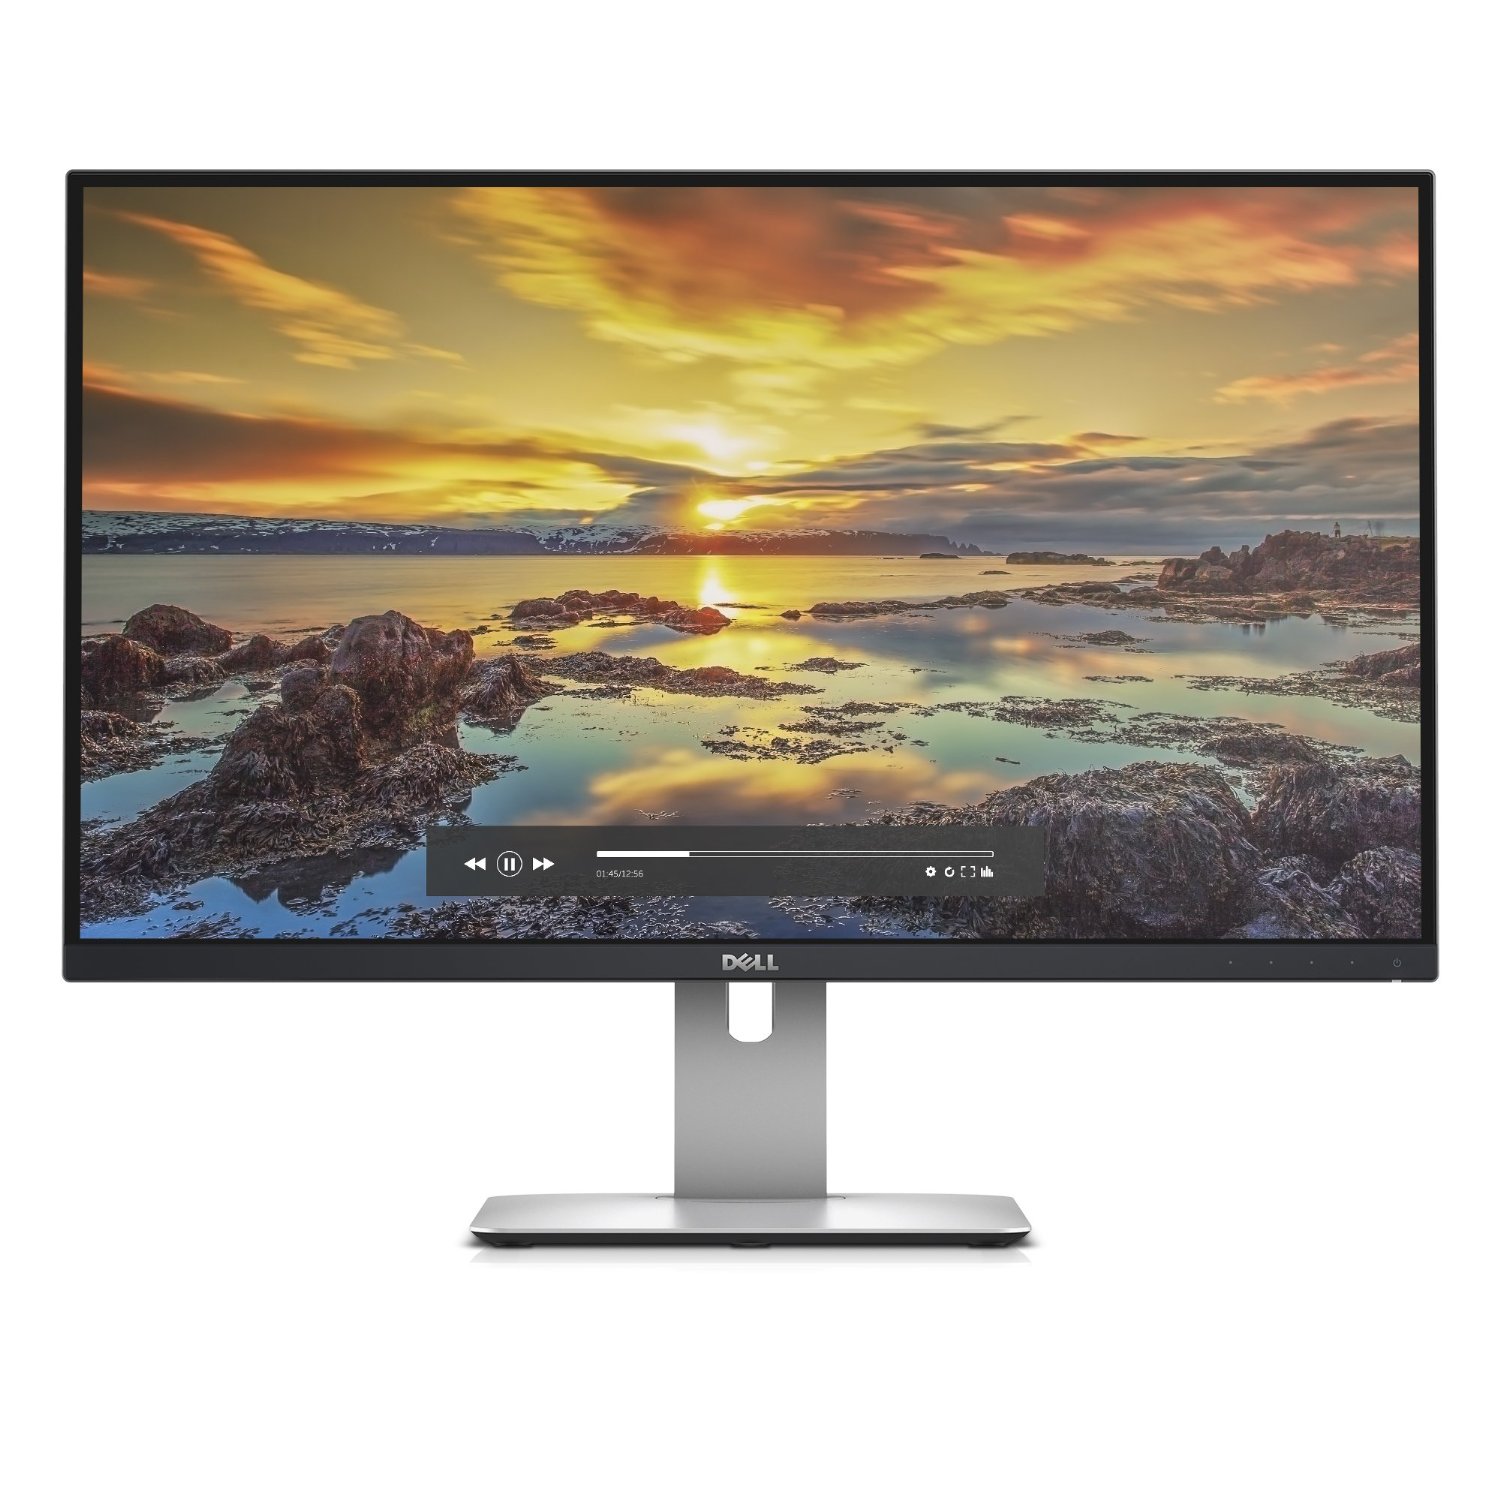 Amazon Black Friday 2020 Monitor Deals, Sales & Ads - 70% OFF